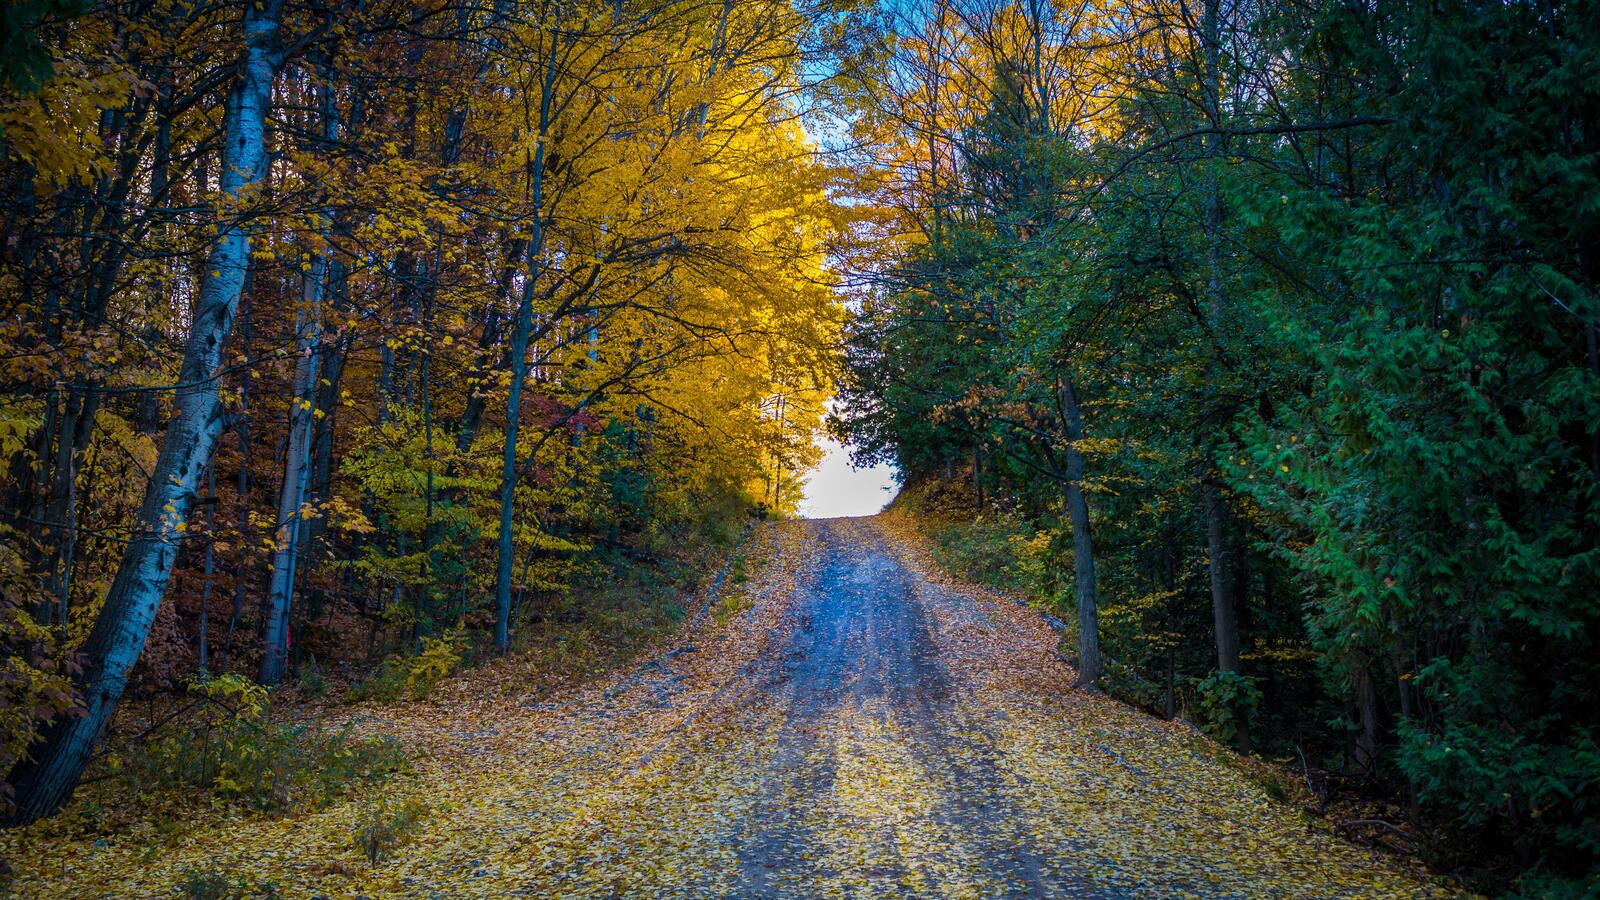 Wallpapers landscapes fallen leaves road in the forest on the desktop